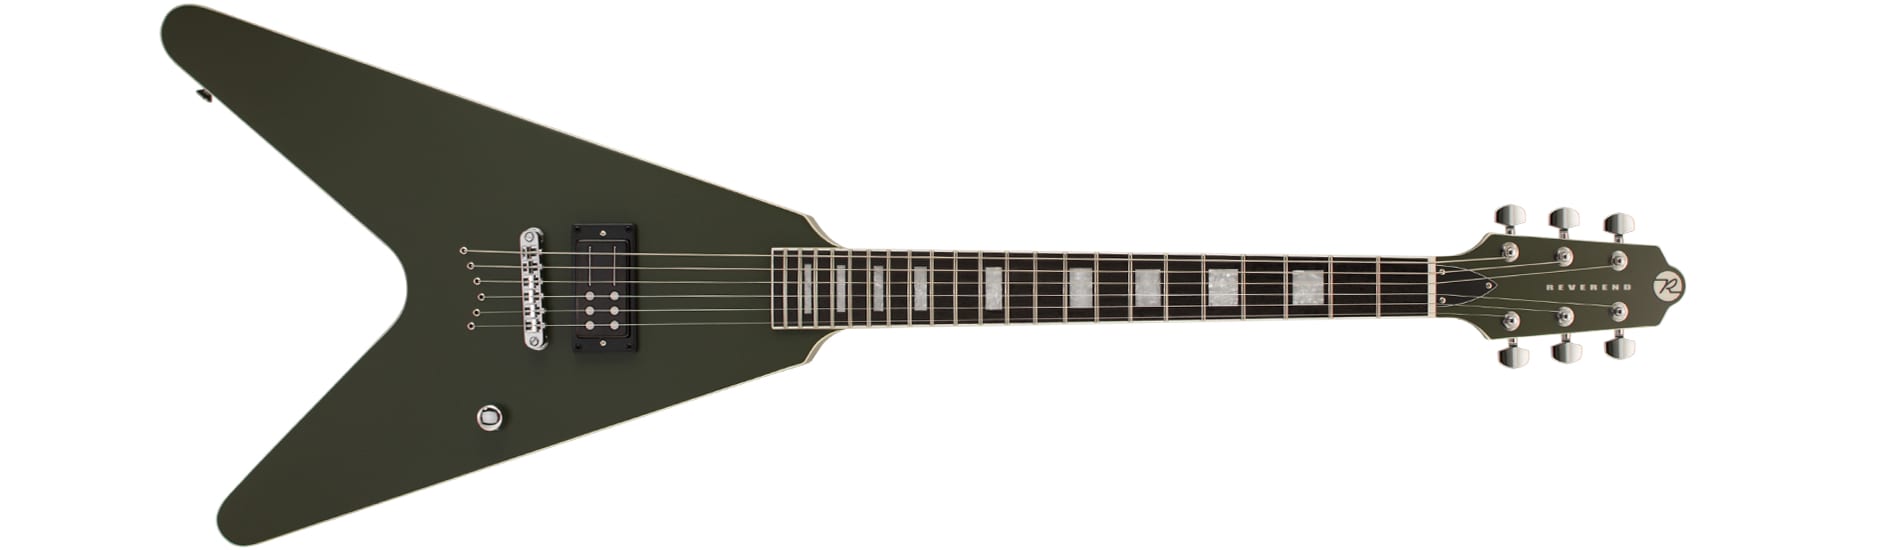 Reverend Guitars Todd Evans Signature Squatch Hammer Army Green